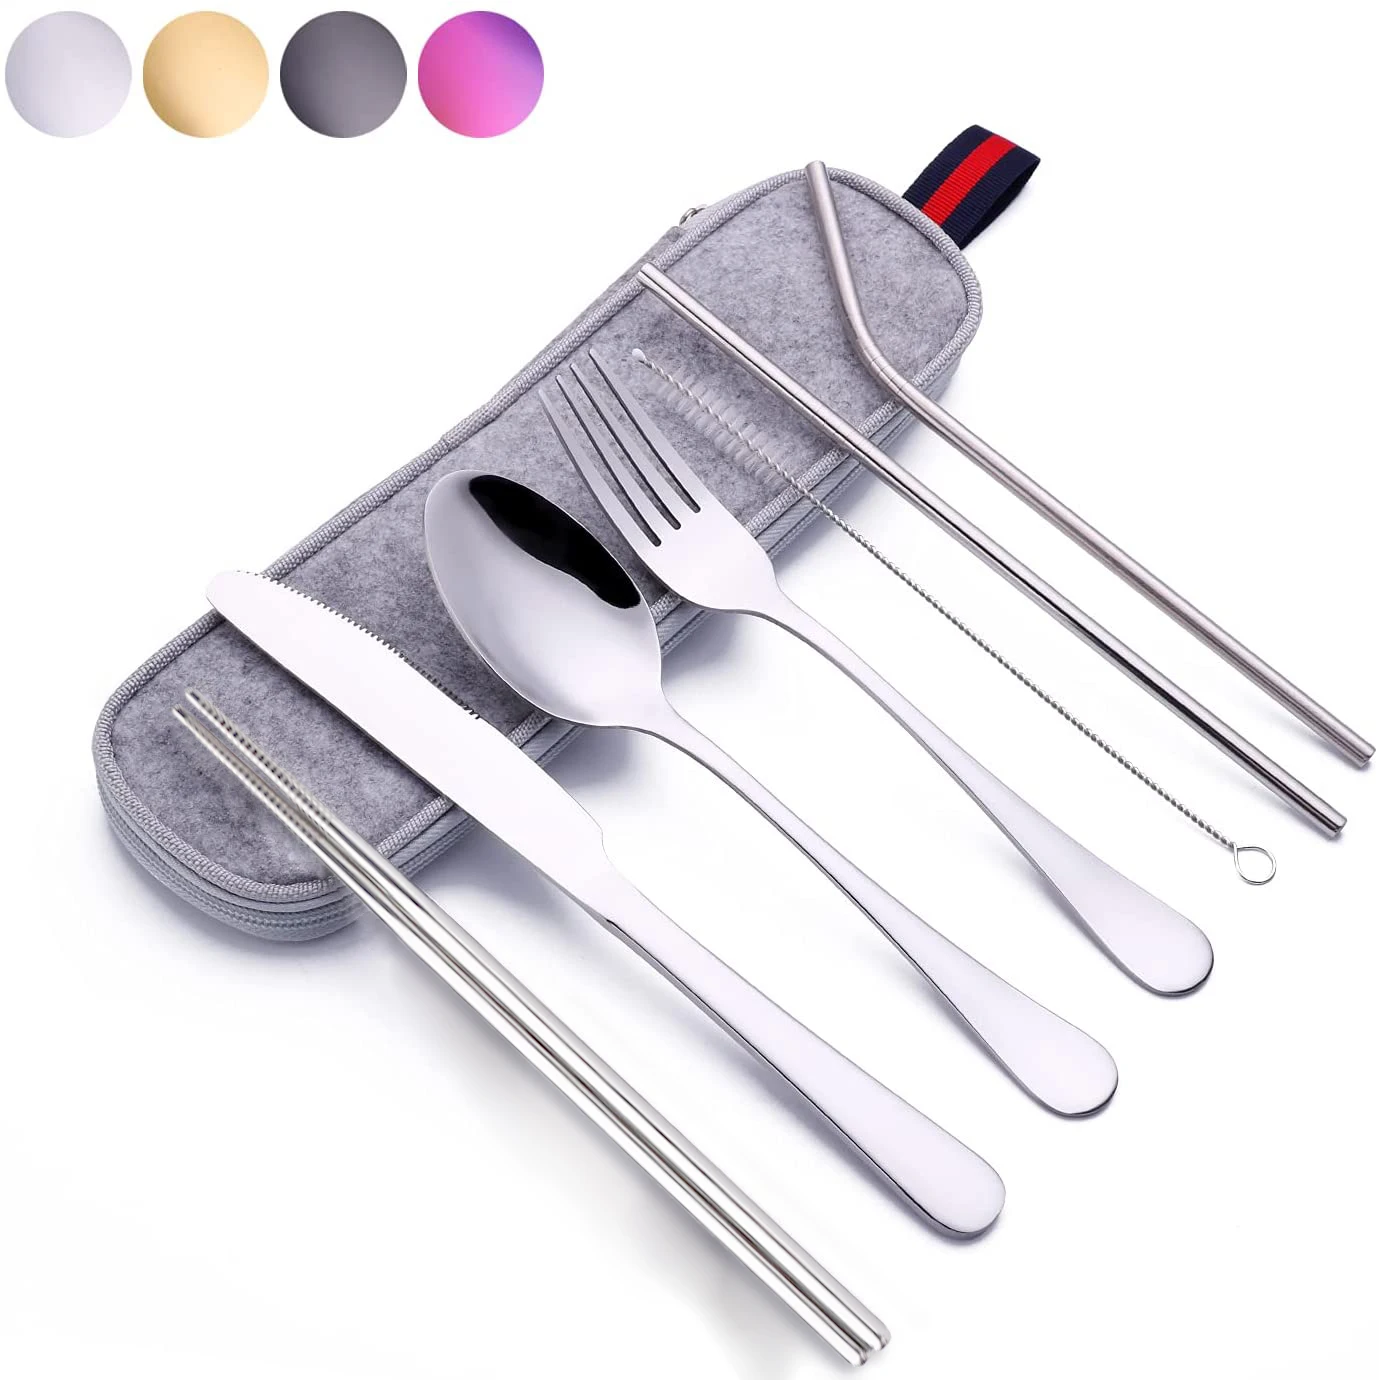 

Reusable Metal Silverware With Chopstick Outdoor Camping Portable Stainless Steel Travel Cutlery Set With Straw, Silver/gold/rosegold/black/colorful